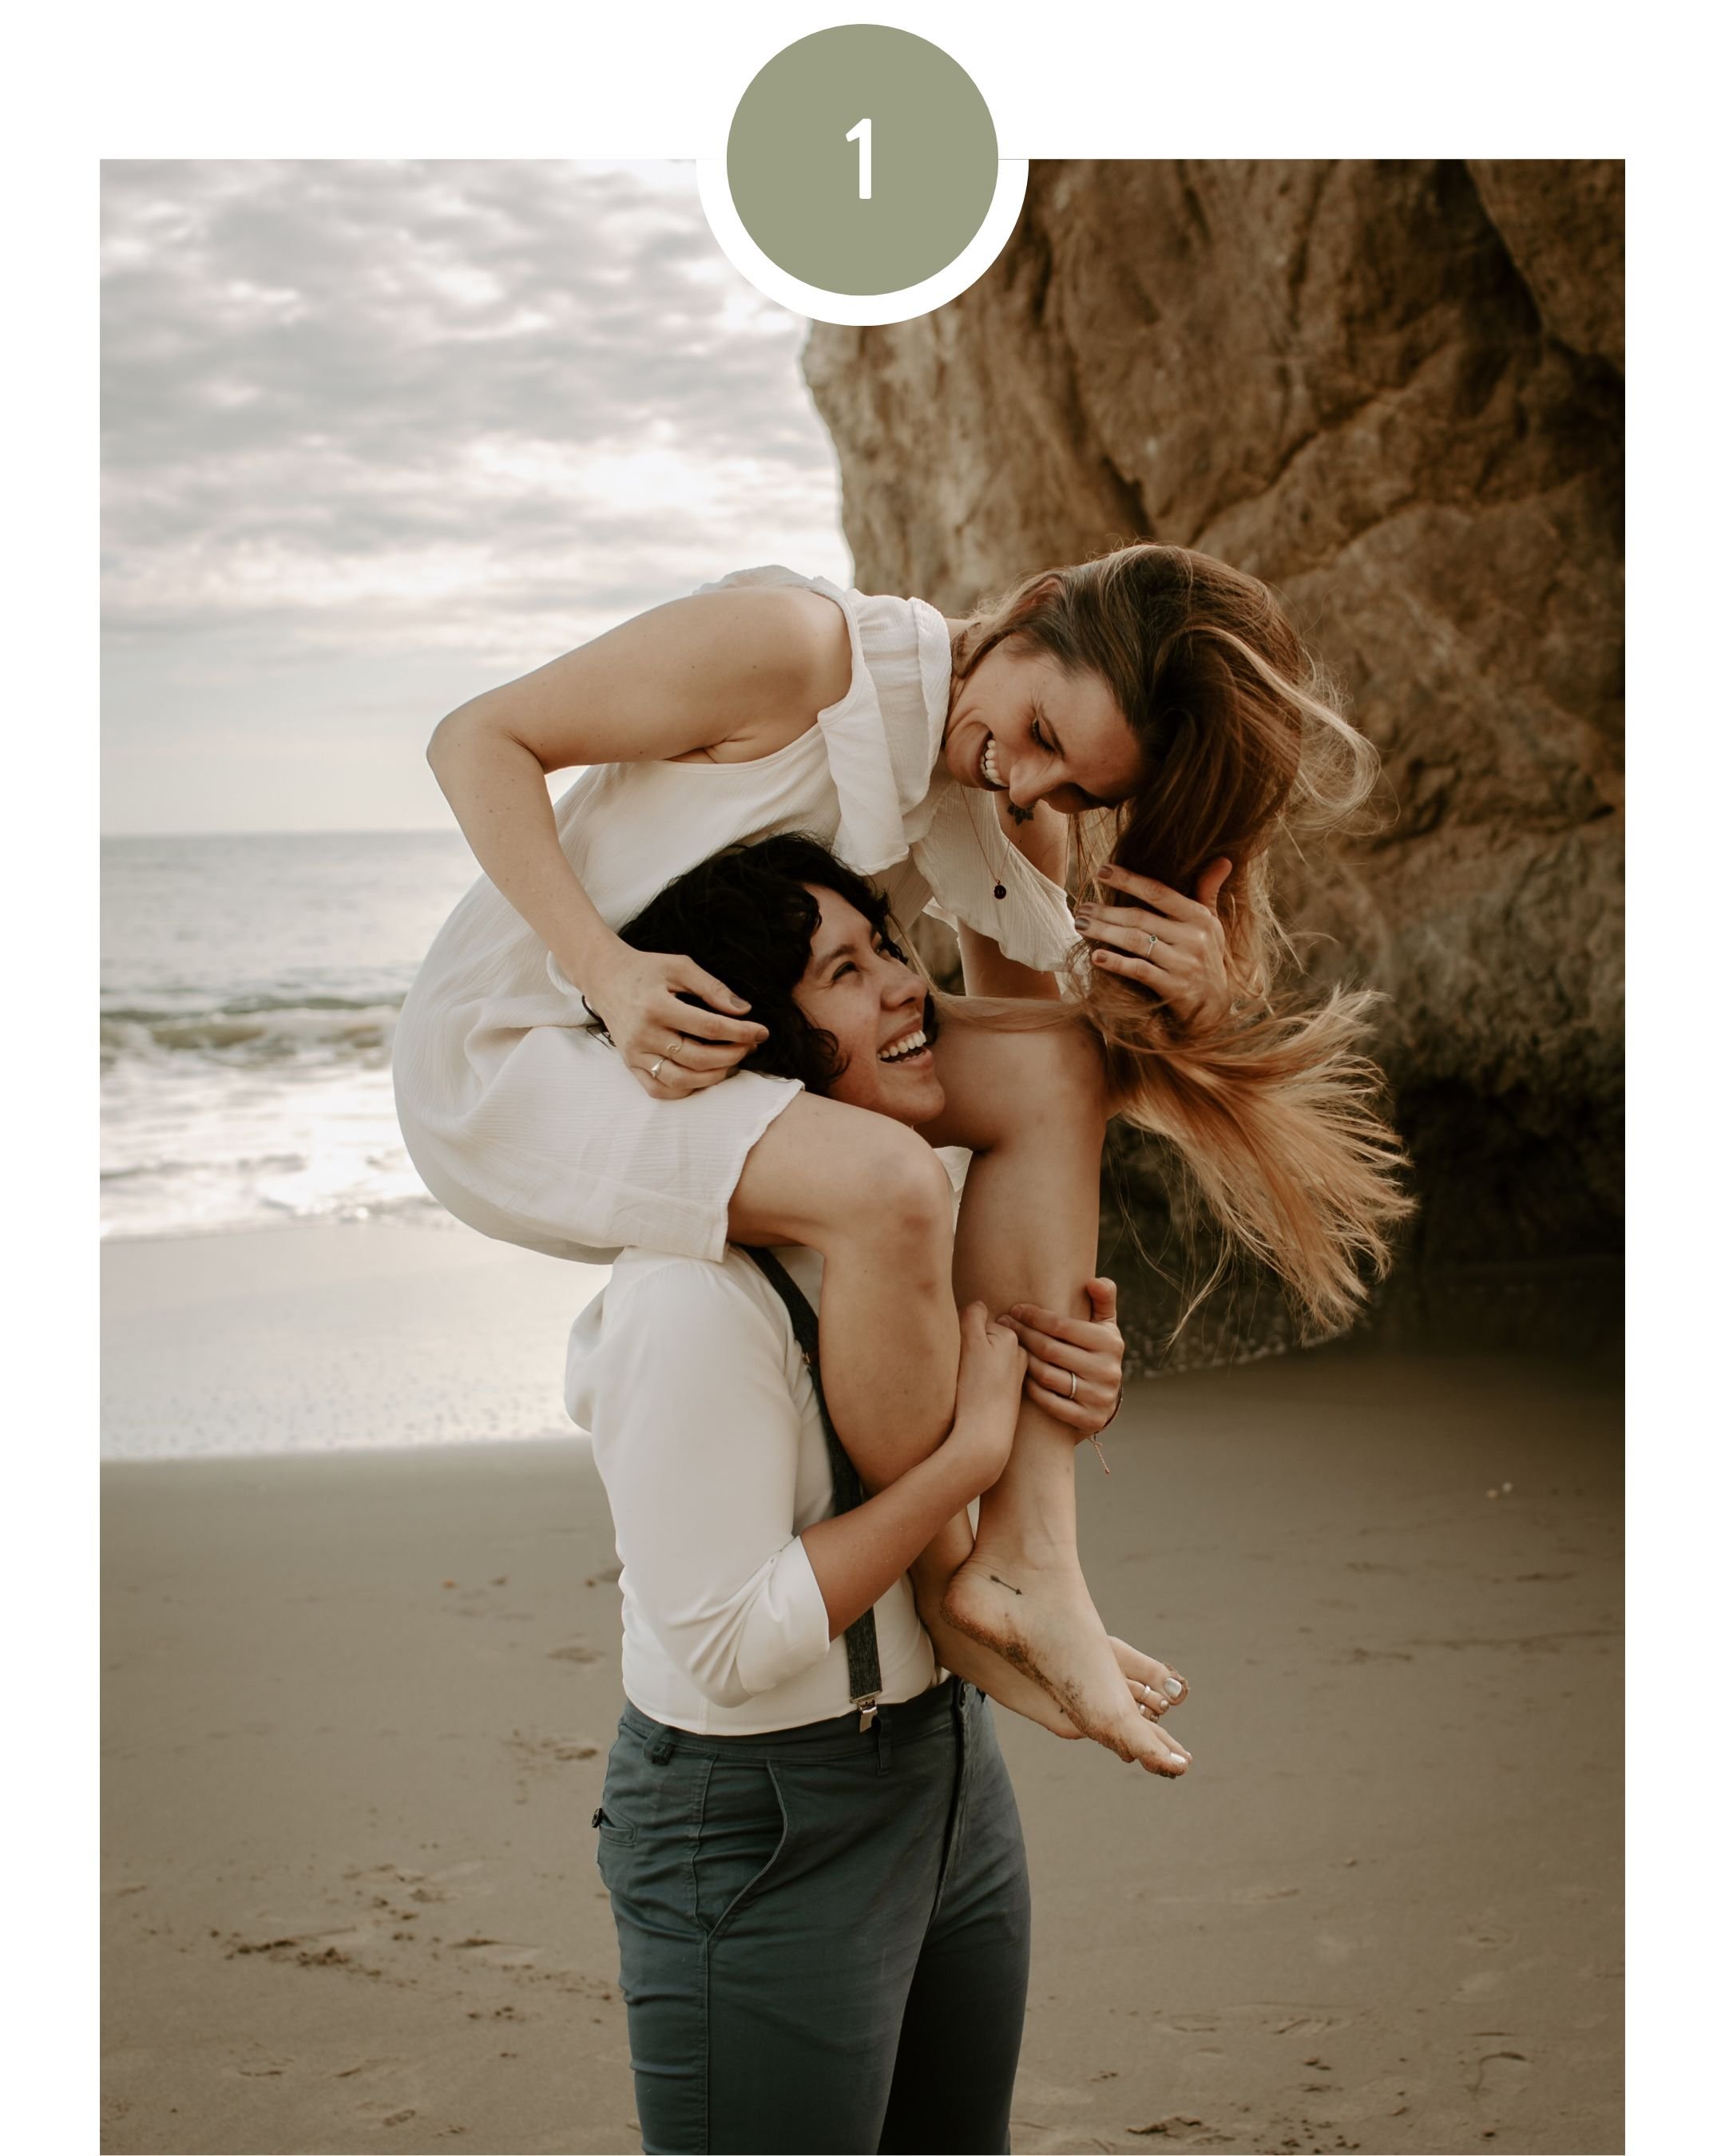 Buy Couples Posing Guide, Posing Prompts, Posing Couples, Poses, Wedding,  Engagements, Candid Photography, Photographers Posing Guidebook Pdf Online  in India - Etsy